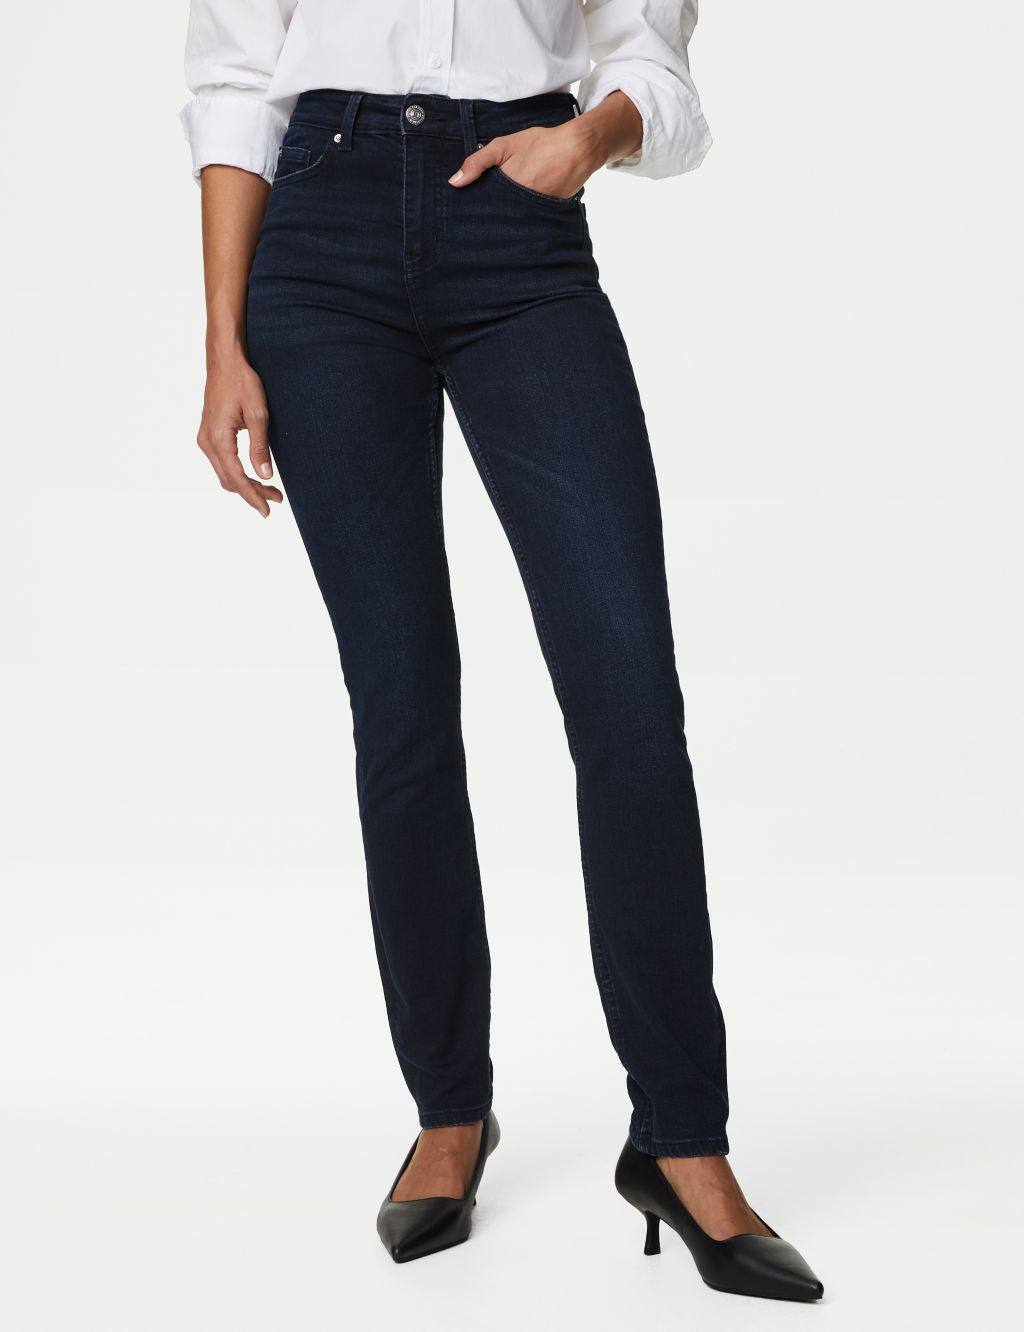 Lily Slim Fit Jeans with Stretch 2 of 6